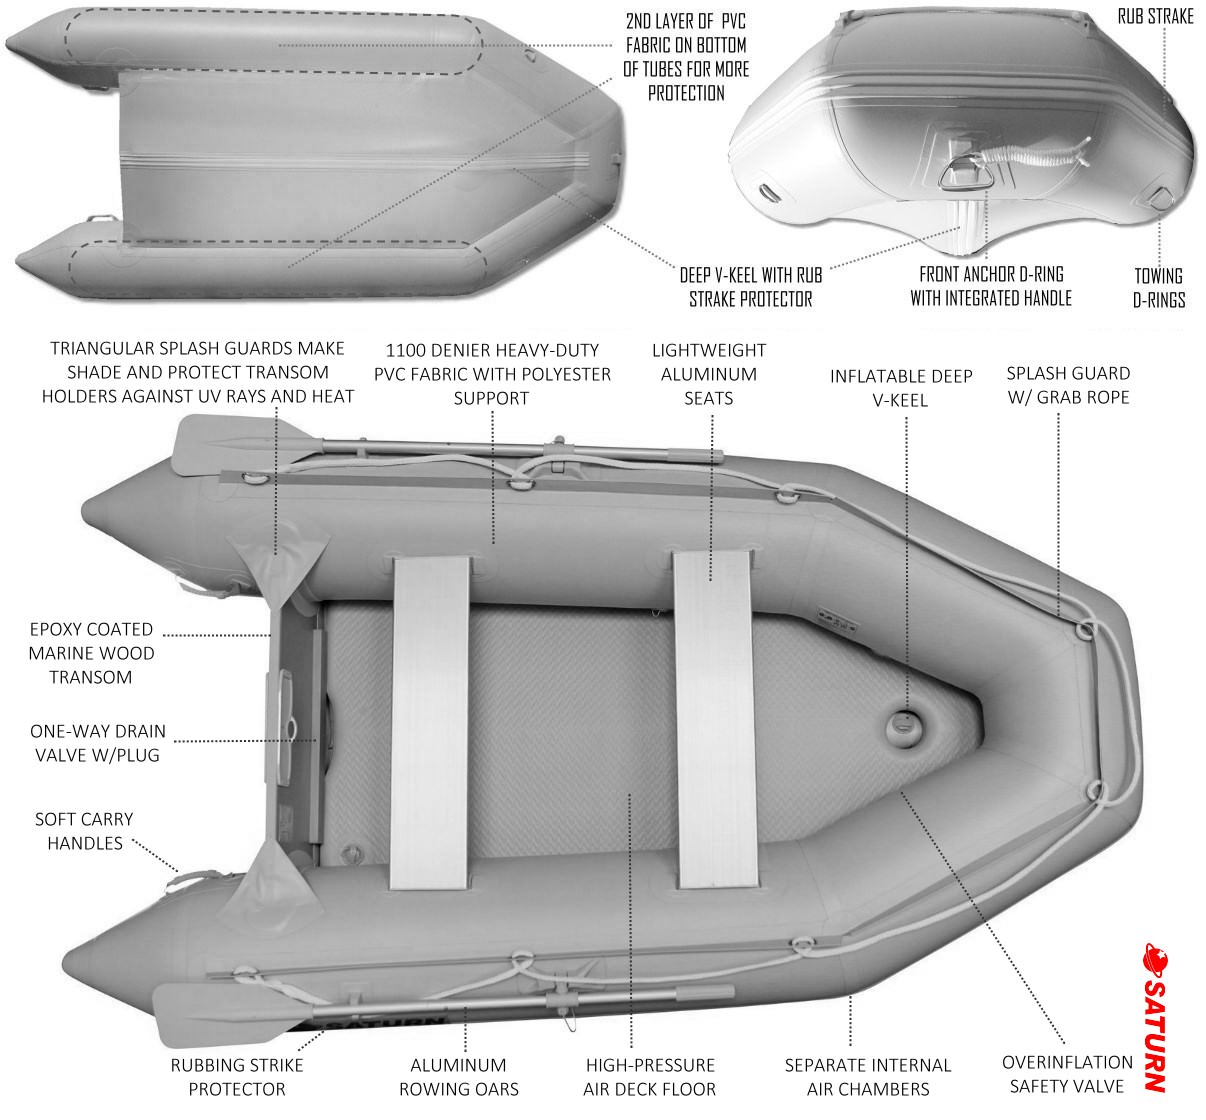 Best Selling Inflatable Boat in an Industry - Saturn 11' SD330 Motorboat